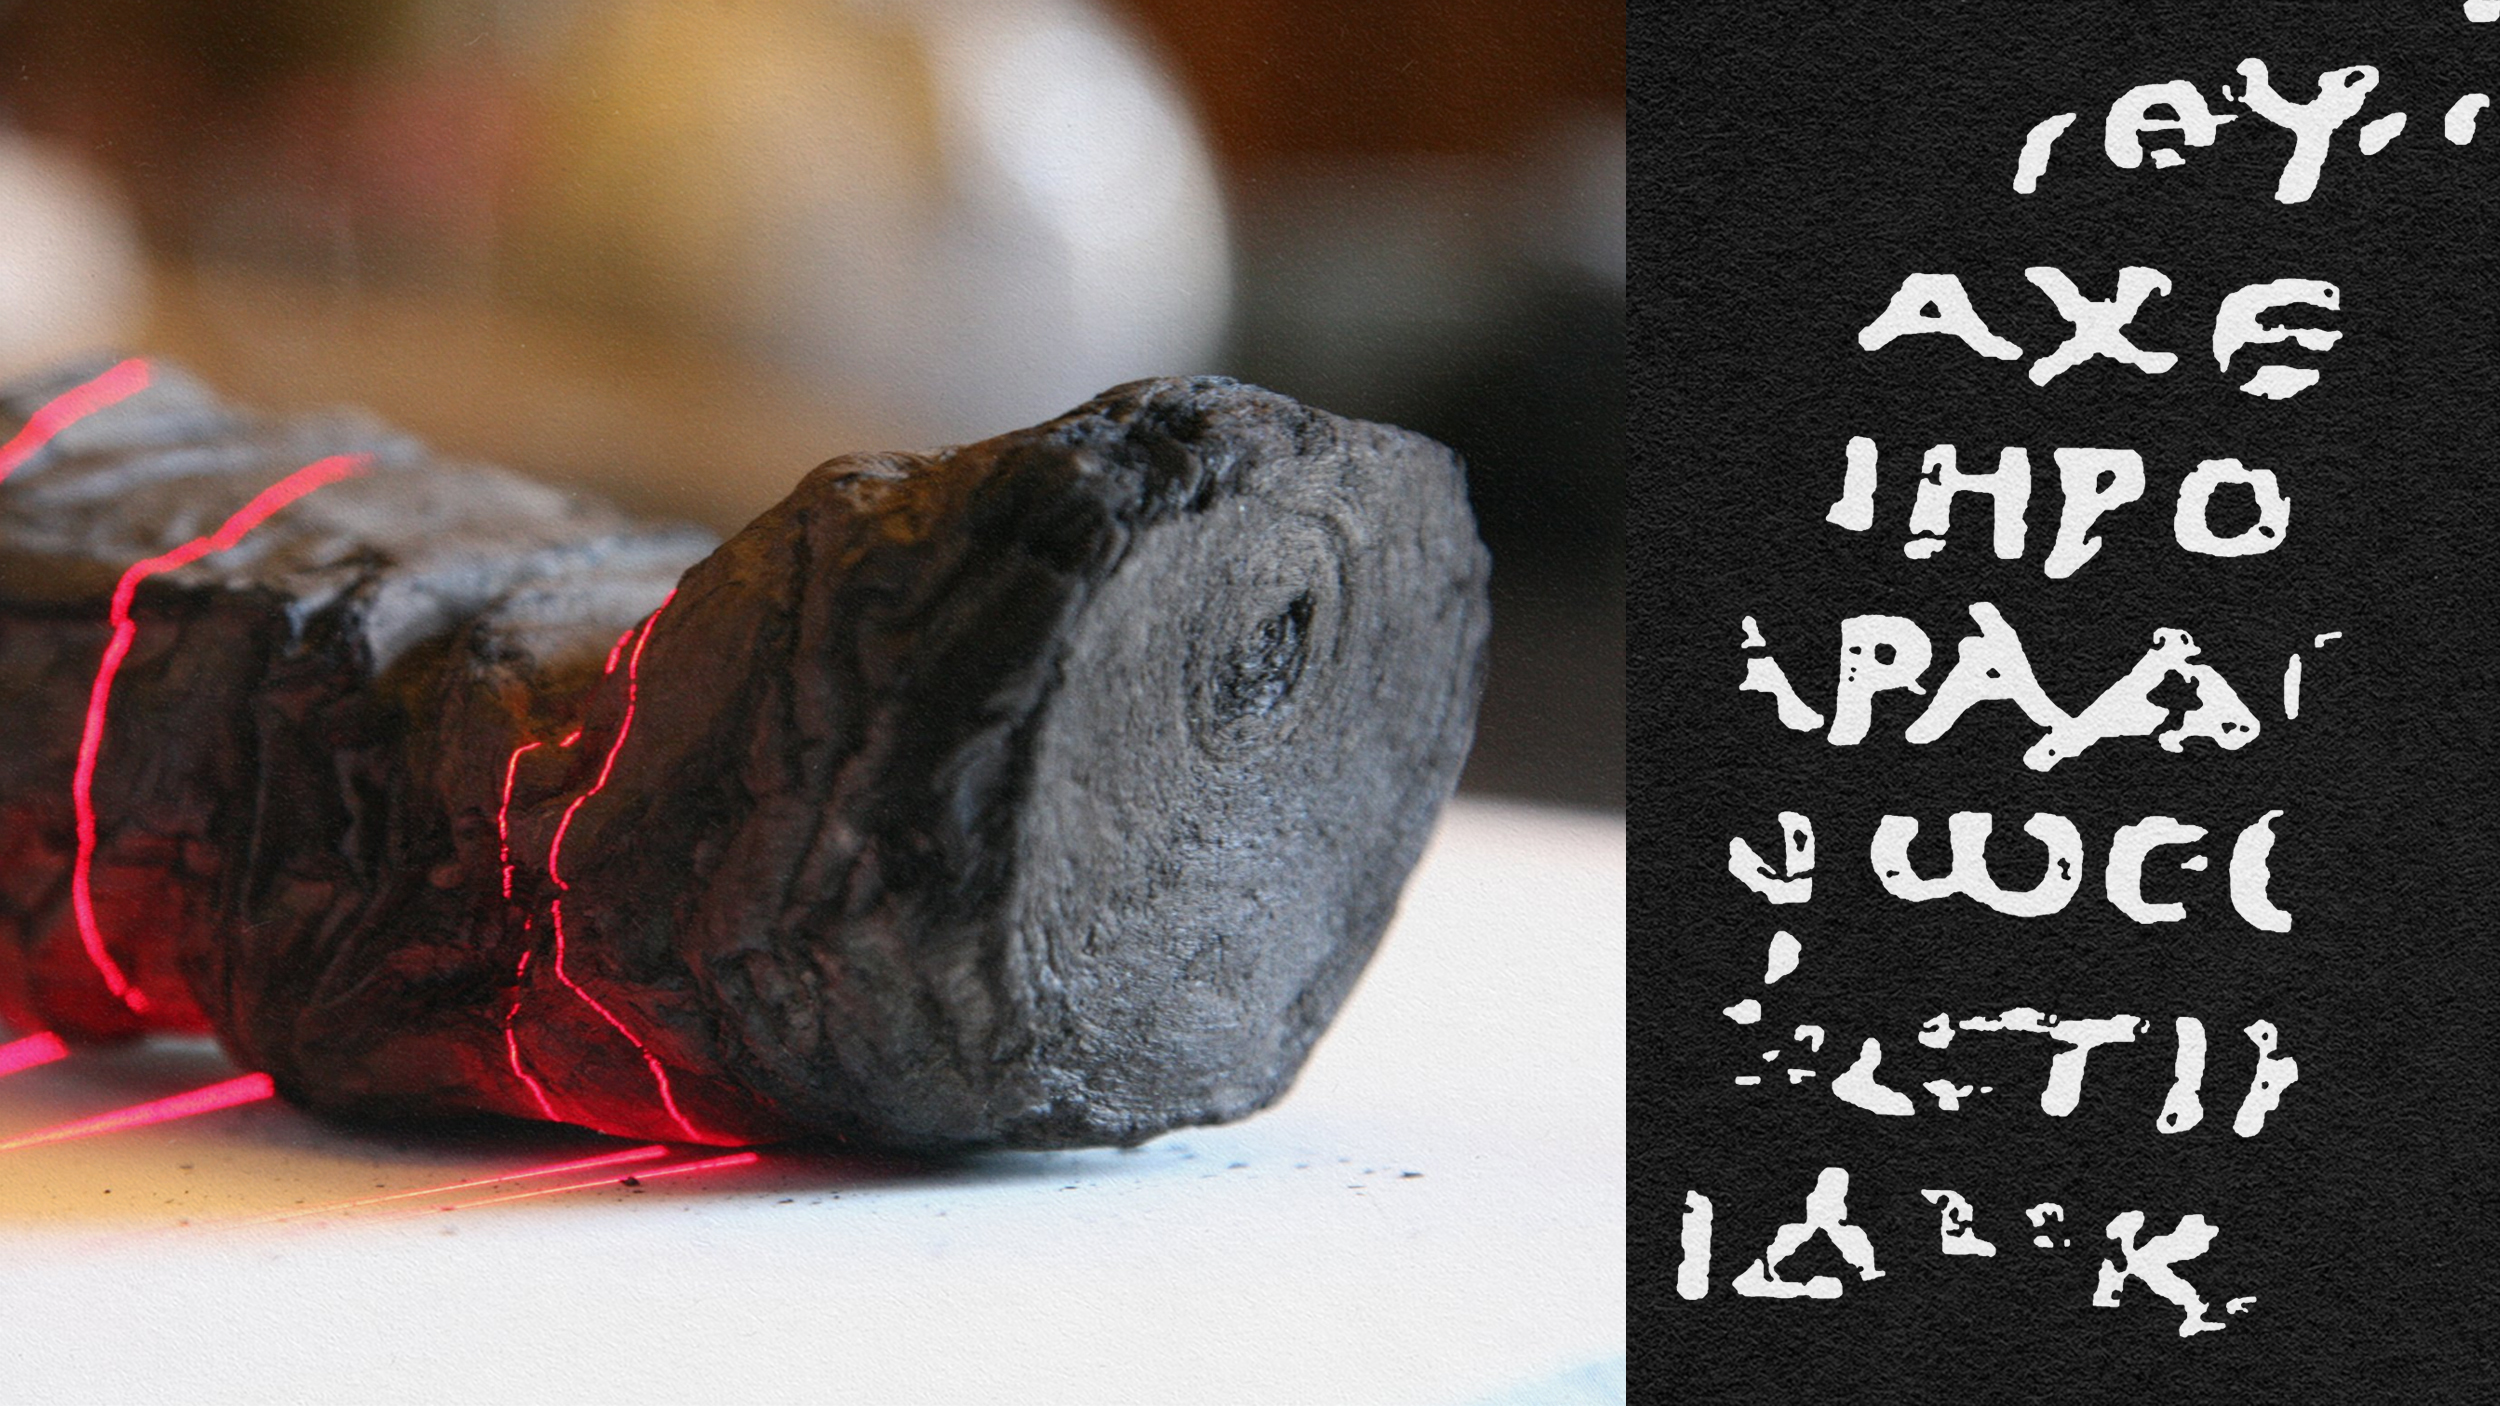 A piece of wood with words written on it, discovered near Vesuvius.